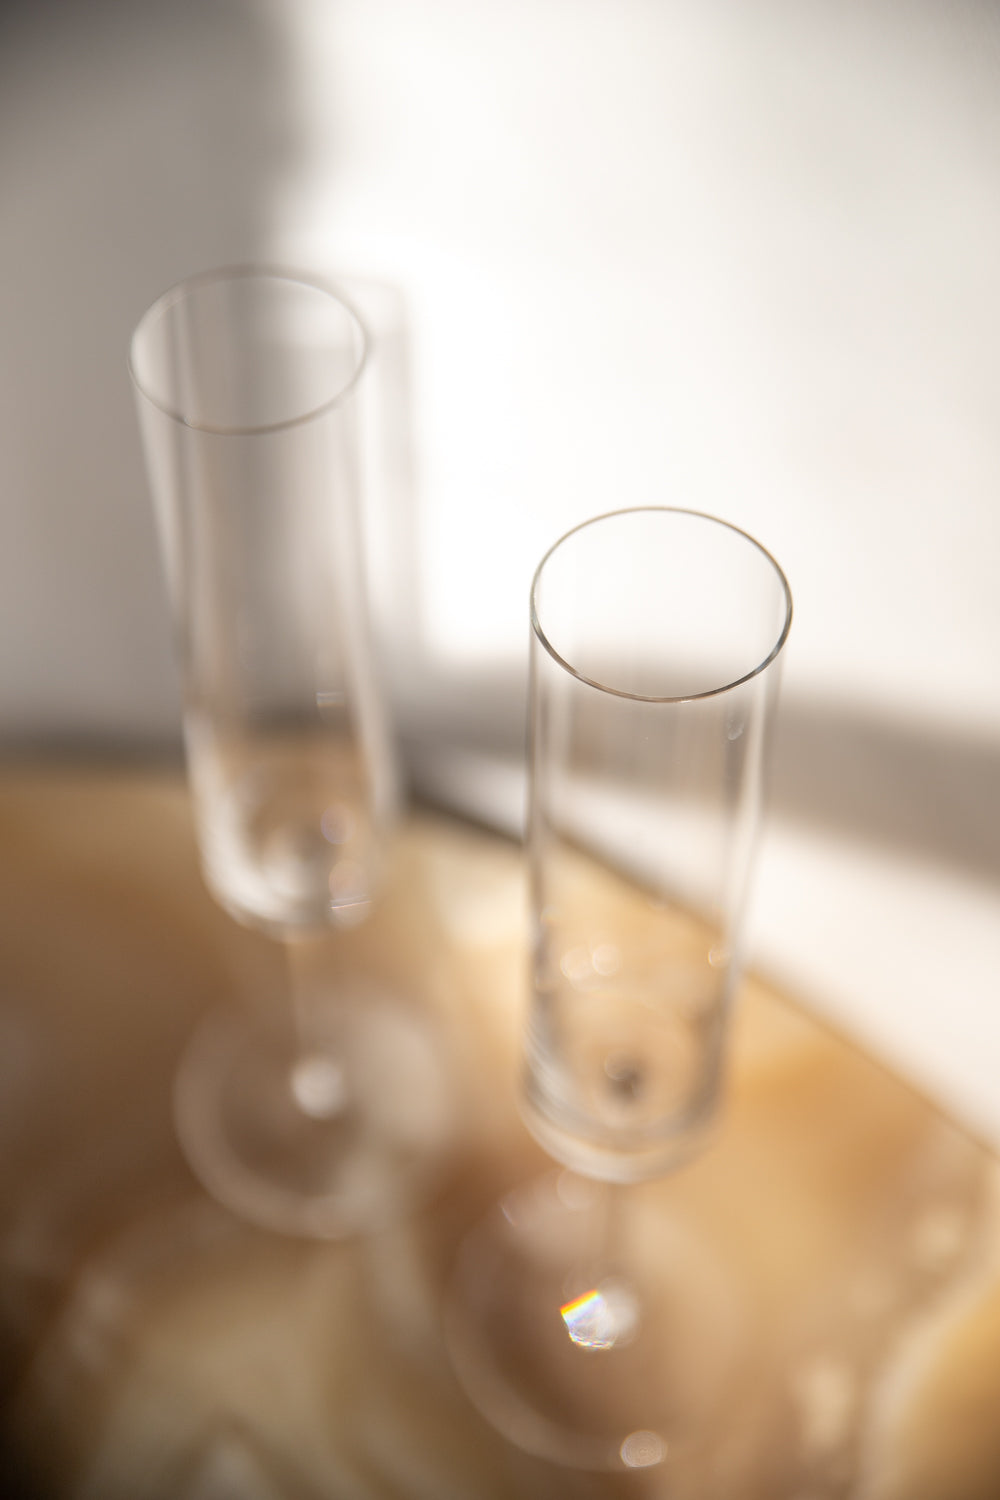 Set of 2 Dainty Champagne Flutes